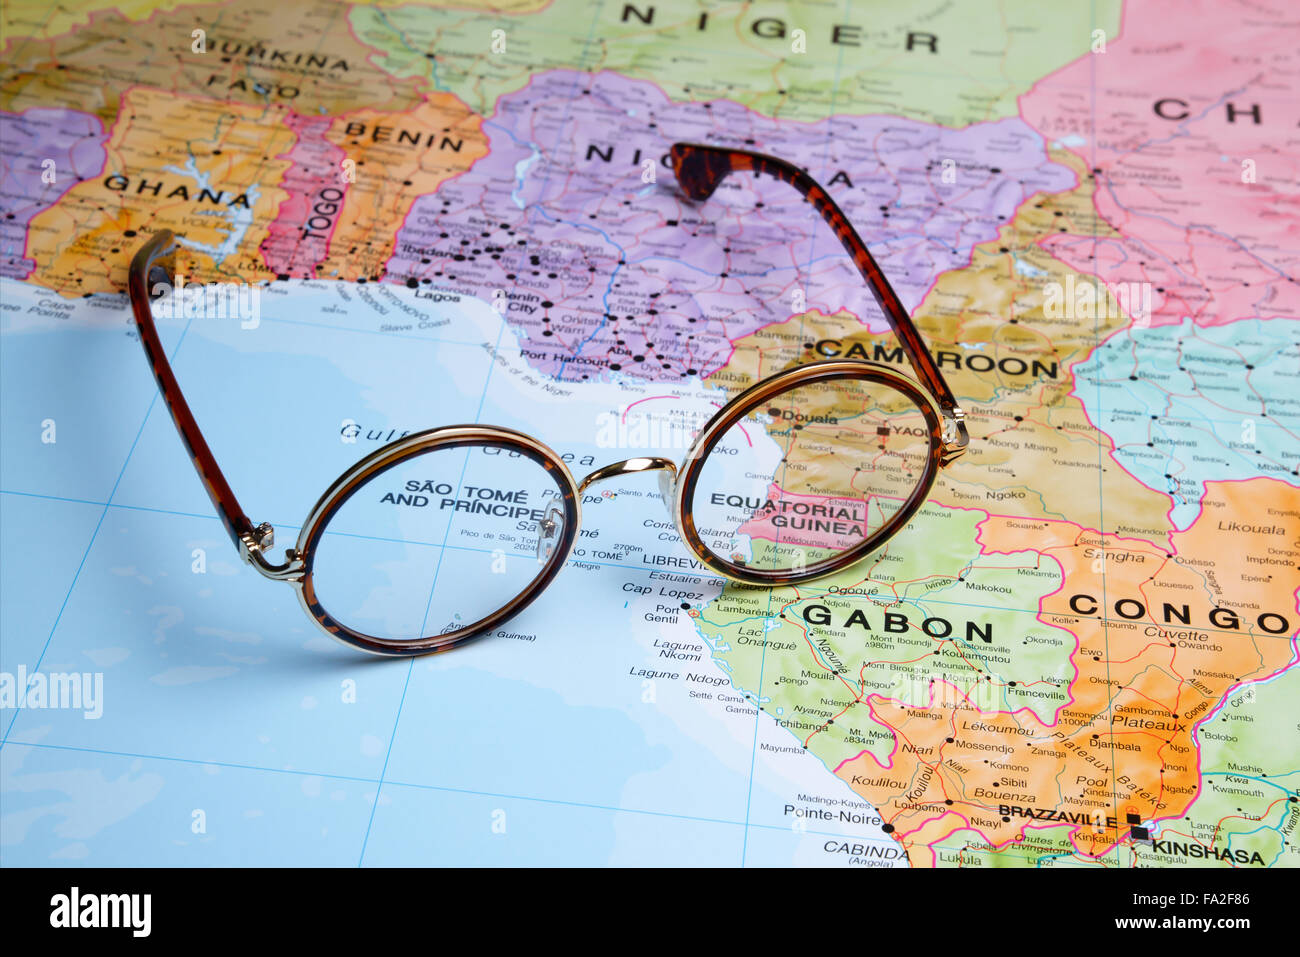 Glasses on a map - Equatorial Guinea Stock Photo